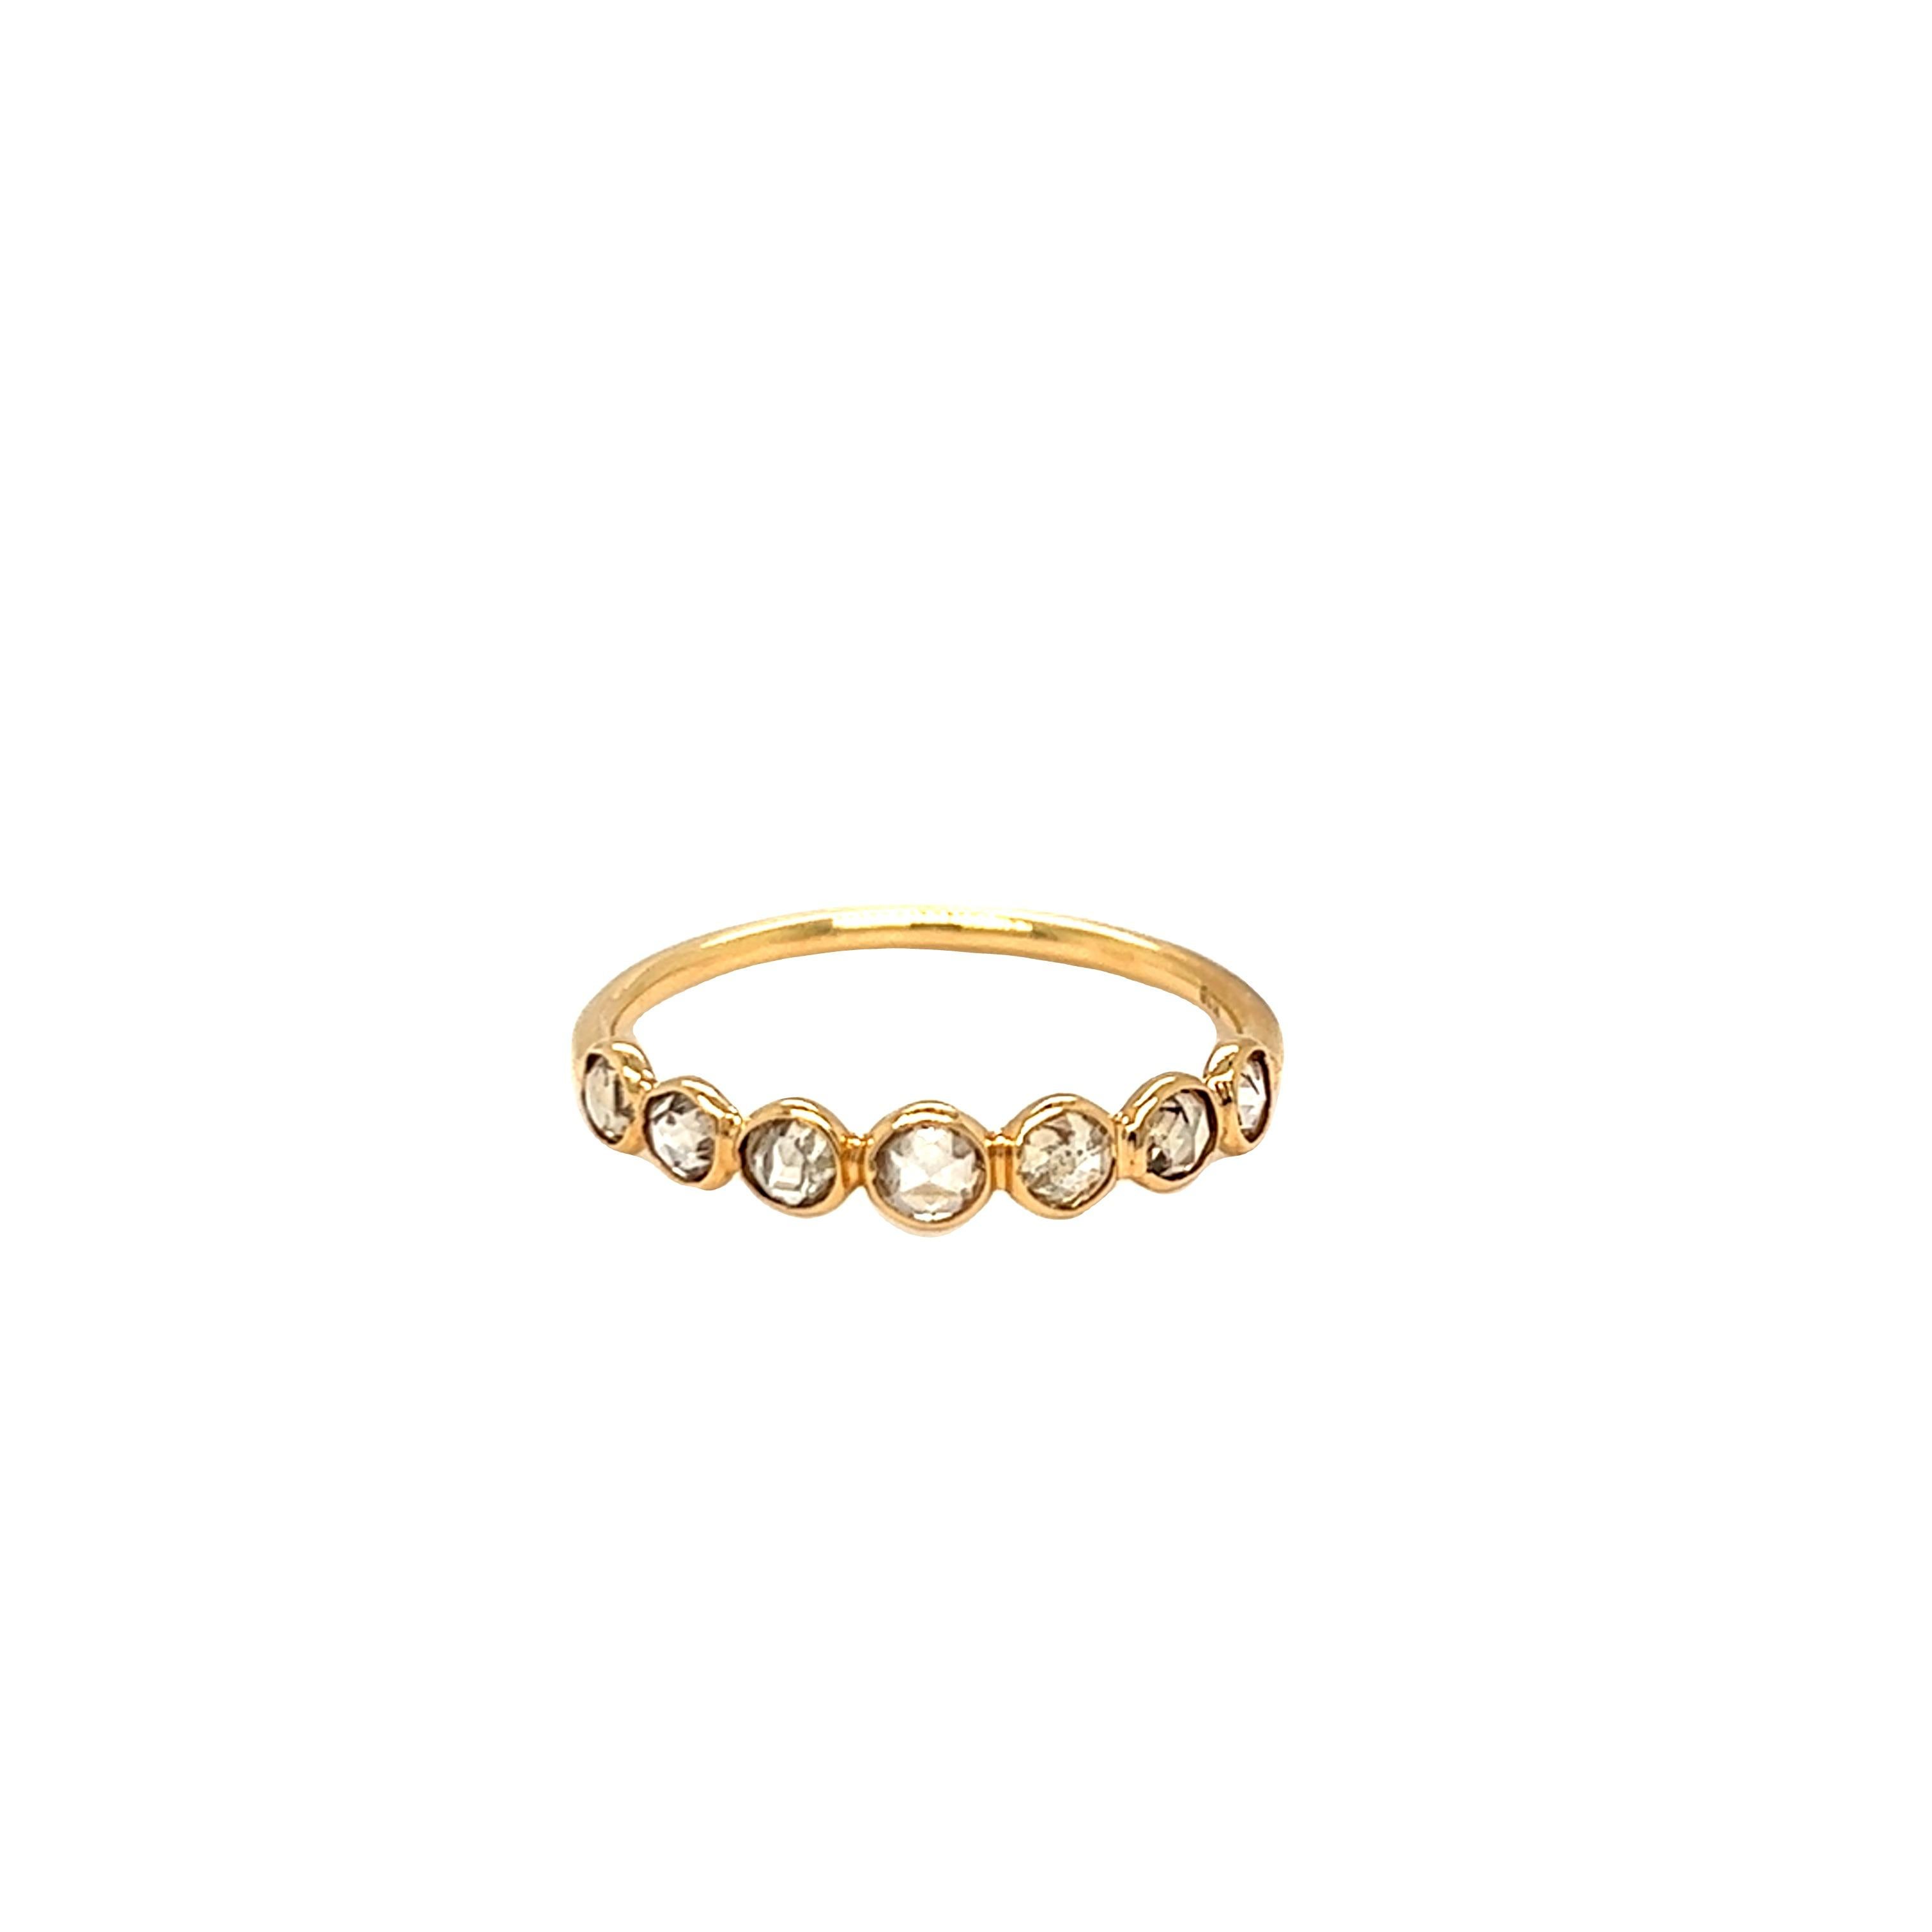 Handcrafted in 18K yellow gold by Nari Fine Jewels in Beverly Hills, CA, this beautiful half eternity ring band has 7 rose cut Cognac diamonds weighing 0.65 carat.  The ring is currently in size 7 and can be resized. 